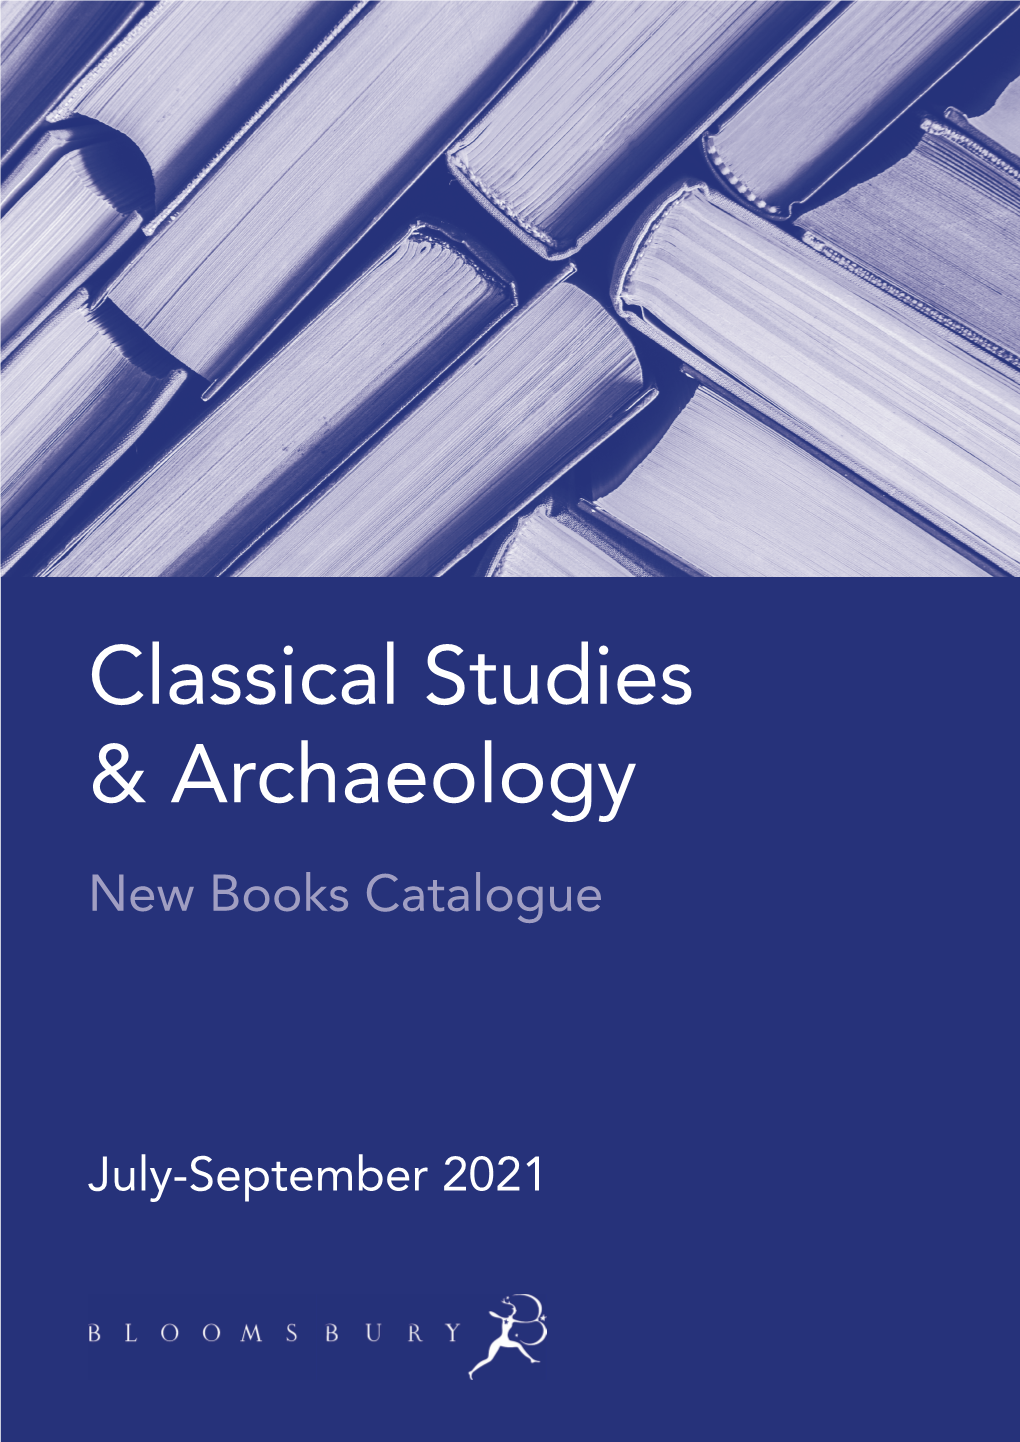 Classical Studies & Archaeology